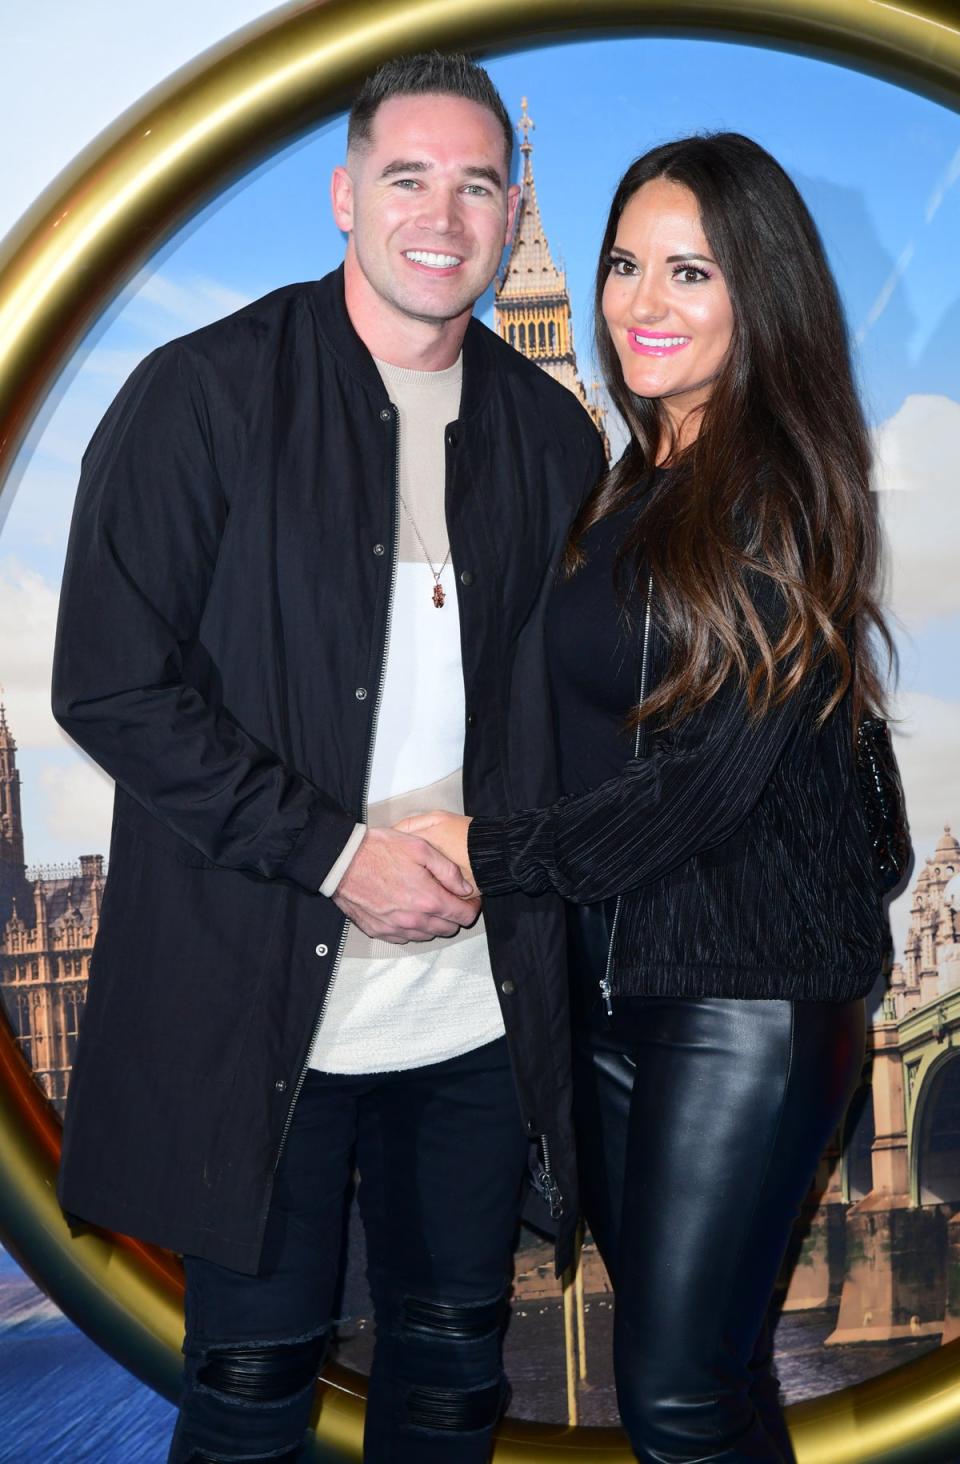 Price was previously fined for a tirade at her ex-husband Kieran Hayler’s fiancée Ms Penticost (PA Wire)